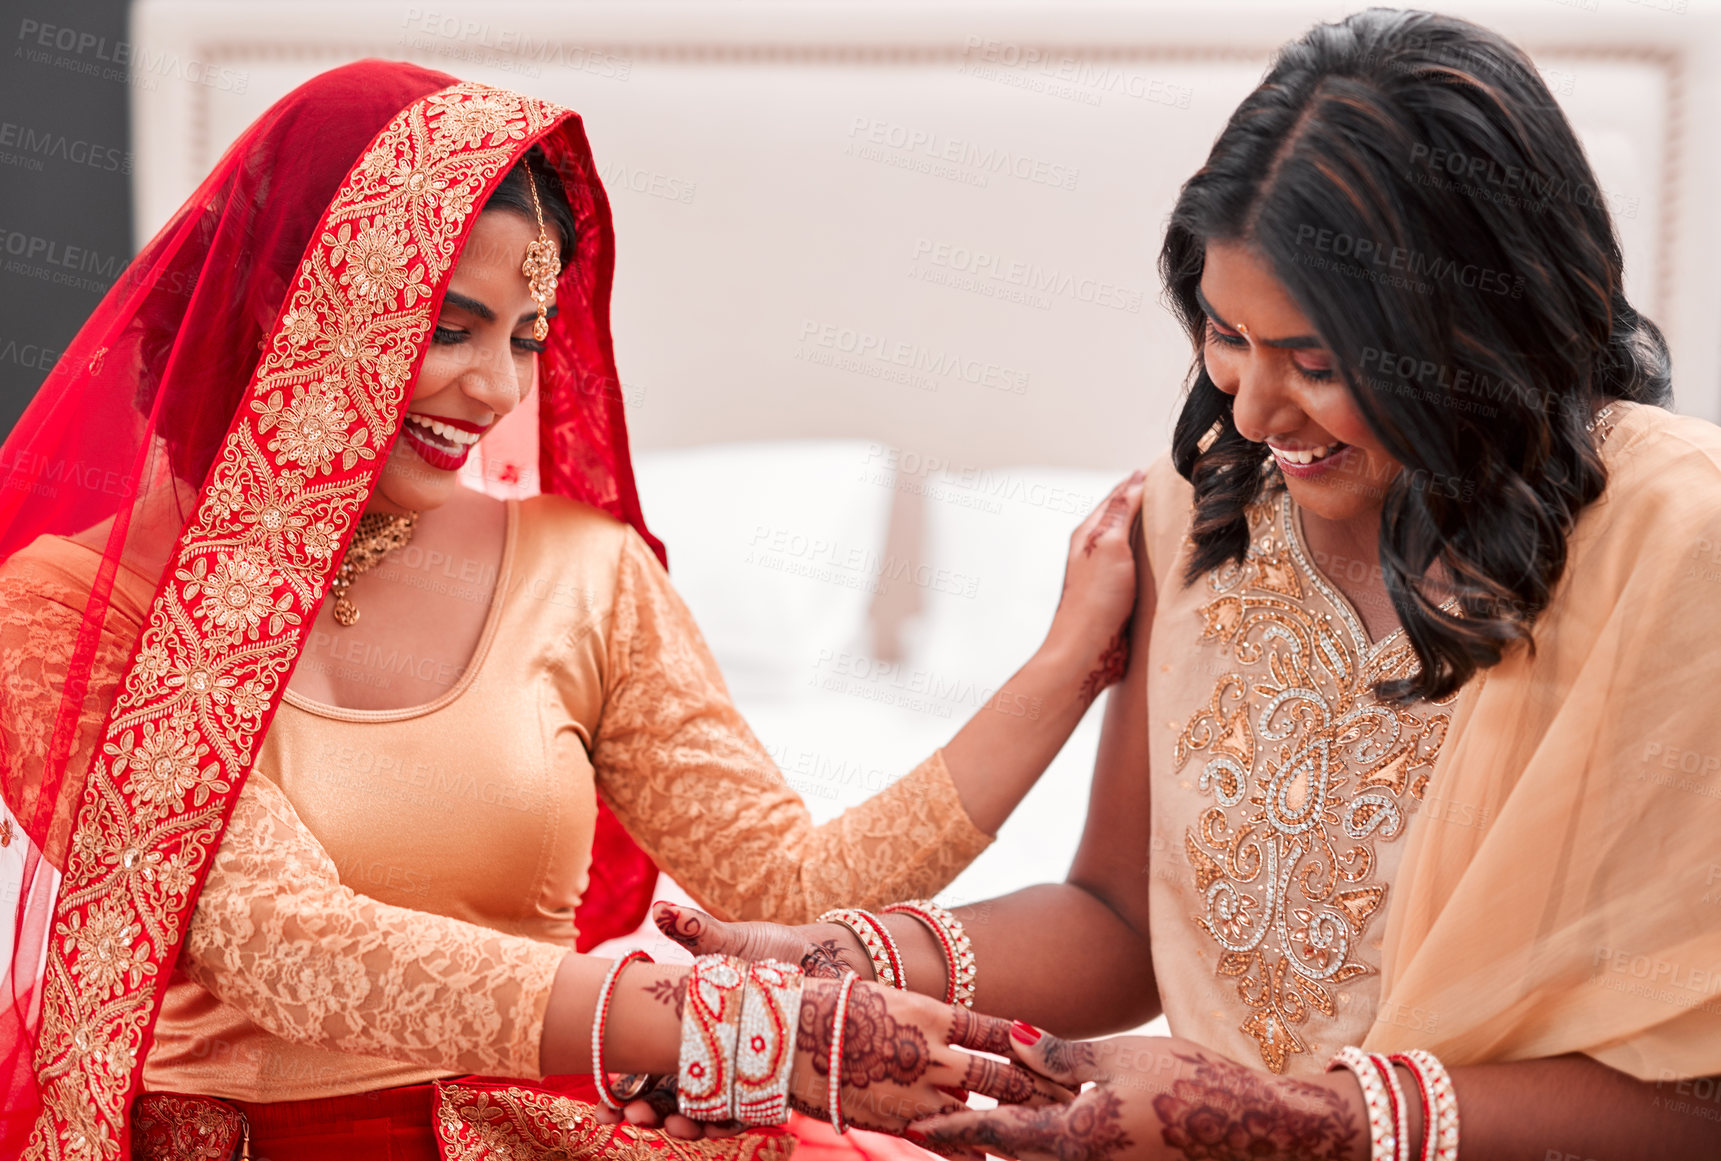 Buy stock photo Shot of a young woman getting her bracelets put on by her bridesmaid on her wedding day